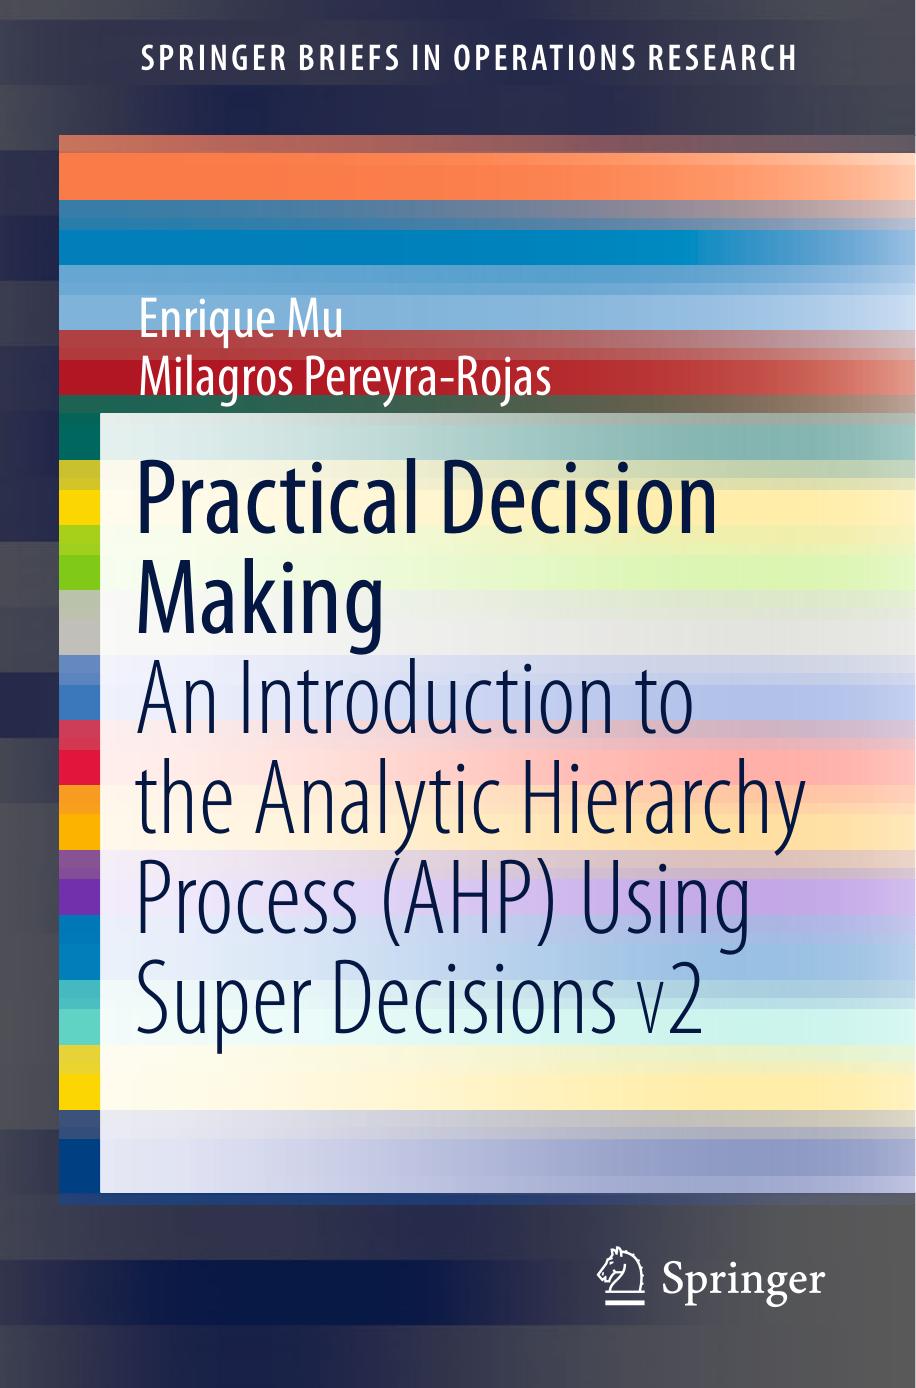 Practical Decision Making An Introduction to the Analytic Hierarchy Process (AHP) Using Super Decisions V2 2017